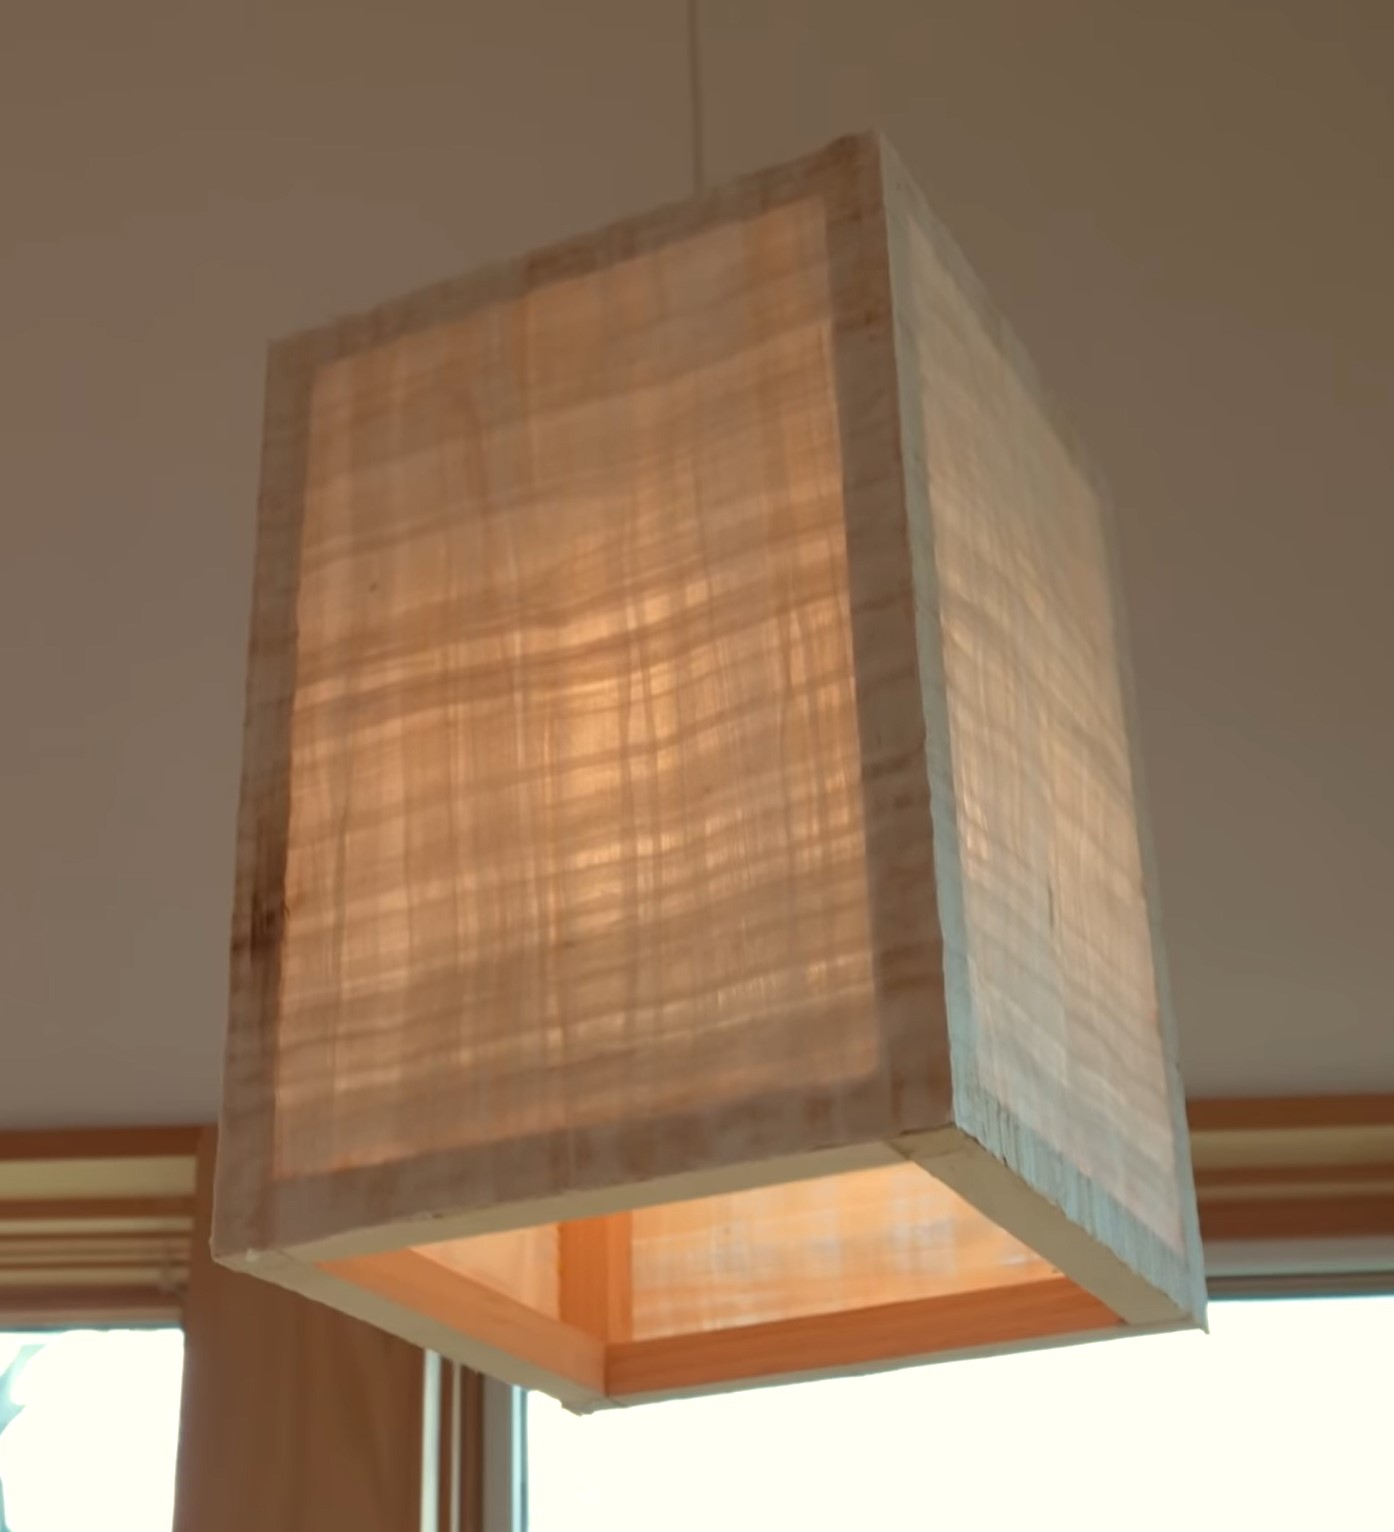 Papyrus paper lamp in modern cabin's dining area.